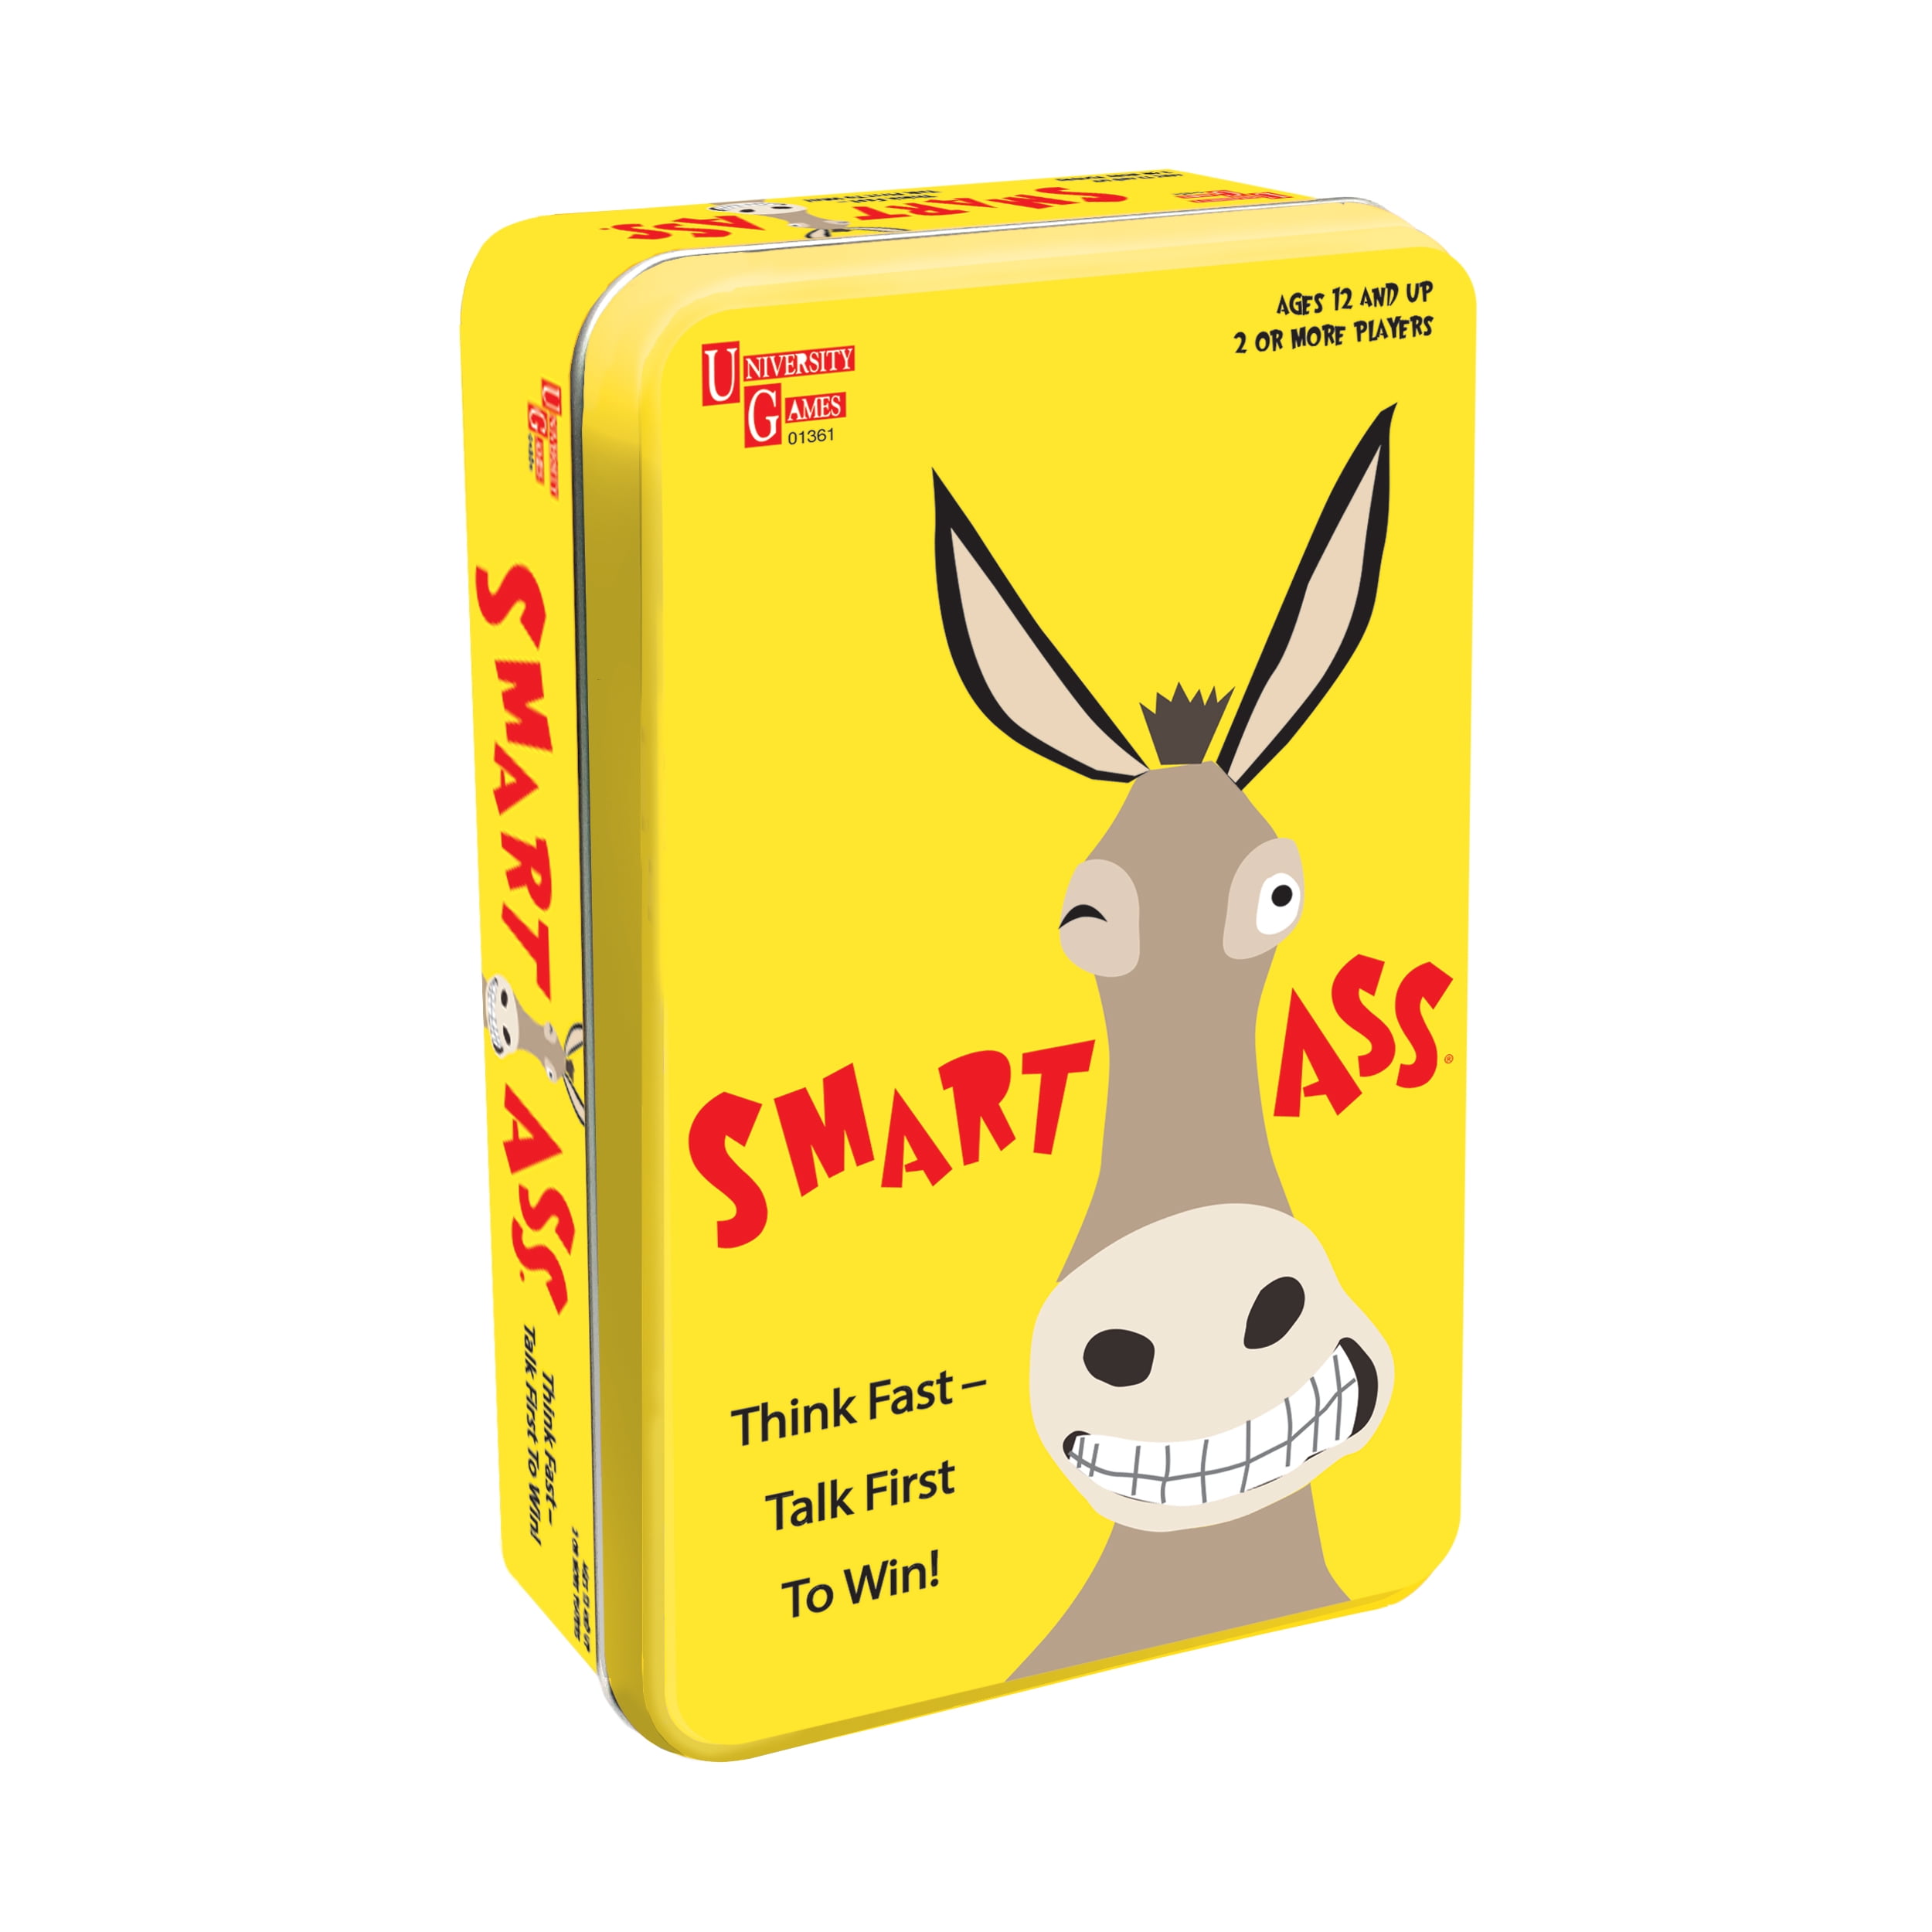 University Games Unv01361 Smart Ass Booster & Card Game Tin Play Toy Creative